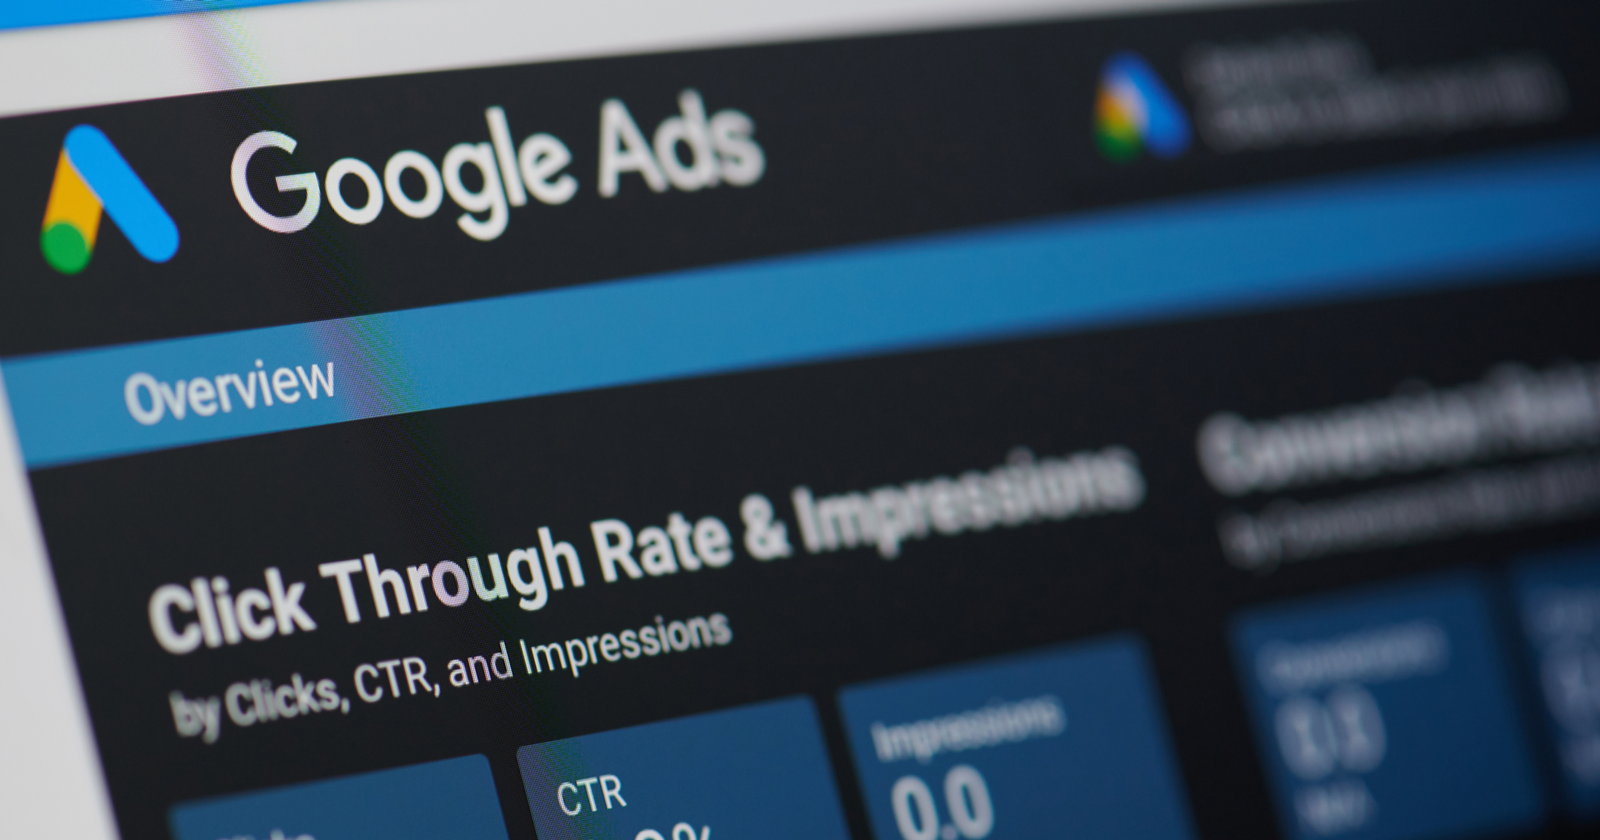 5 Amazing Google Ads Tools You Need to Use